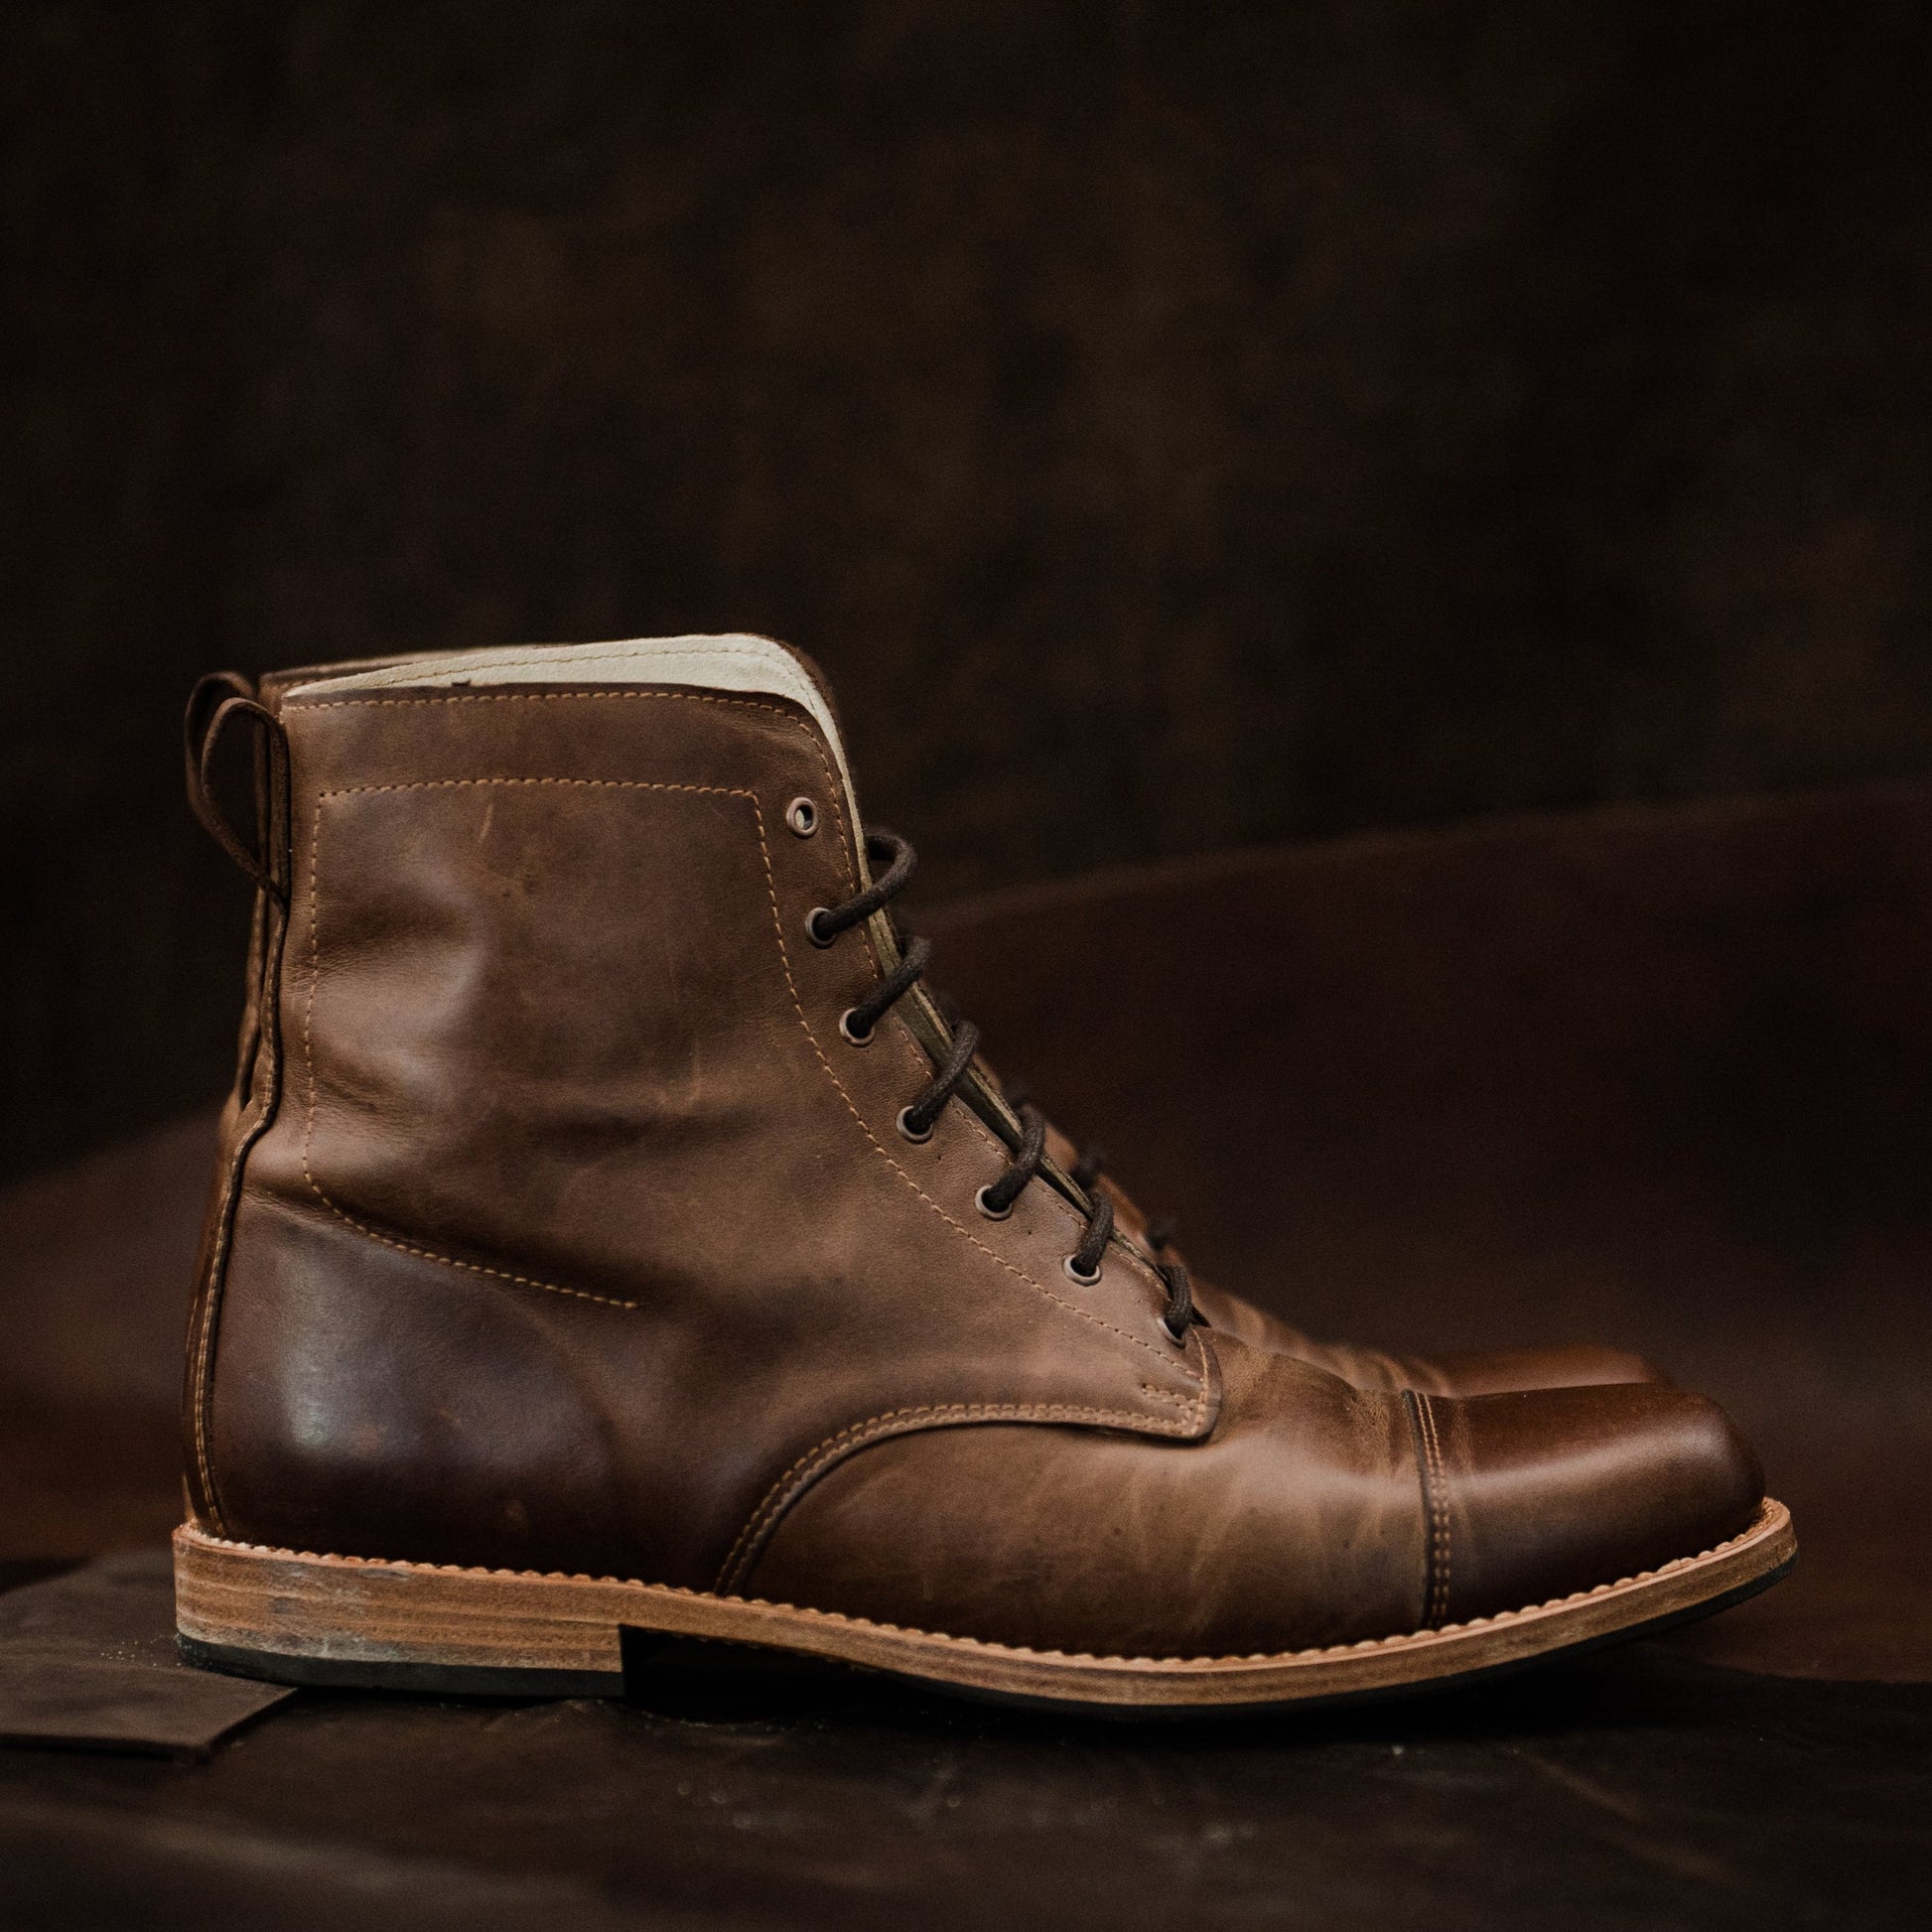 Vintage Engineer Boots: EARLY VINTAGE ZIPPERS